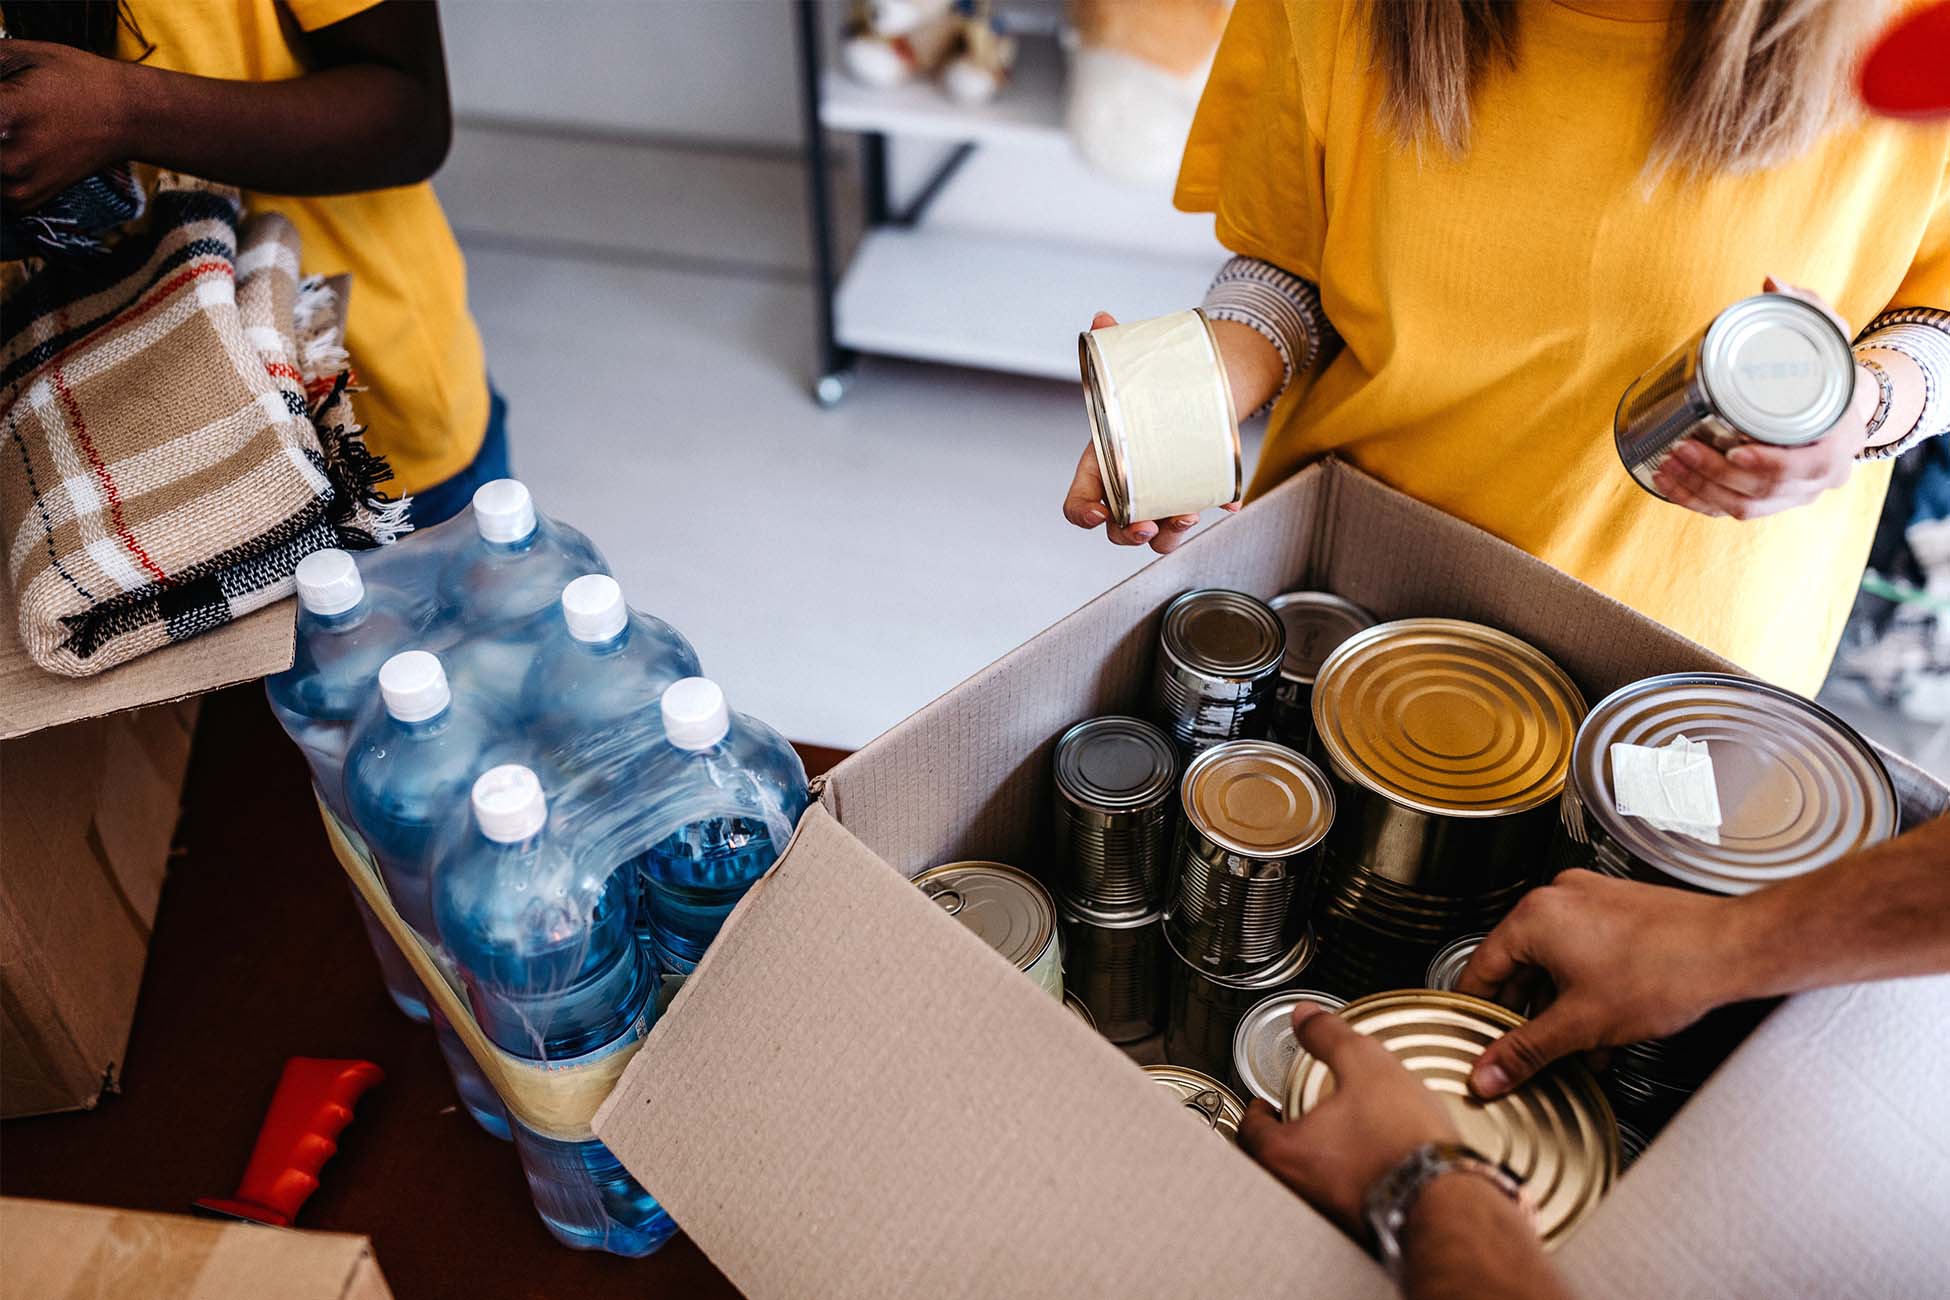 People wearing yellow shirts add canned goods and other items to a box.